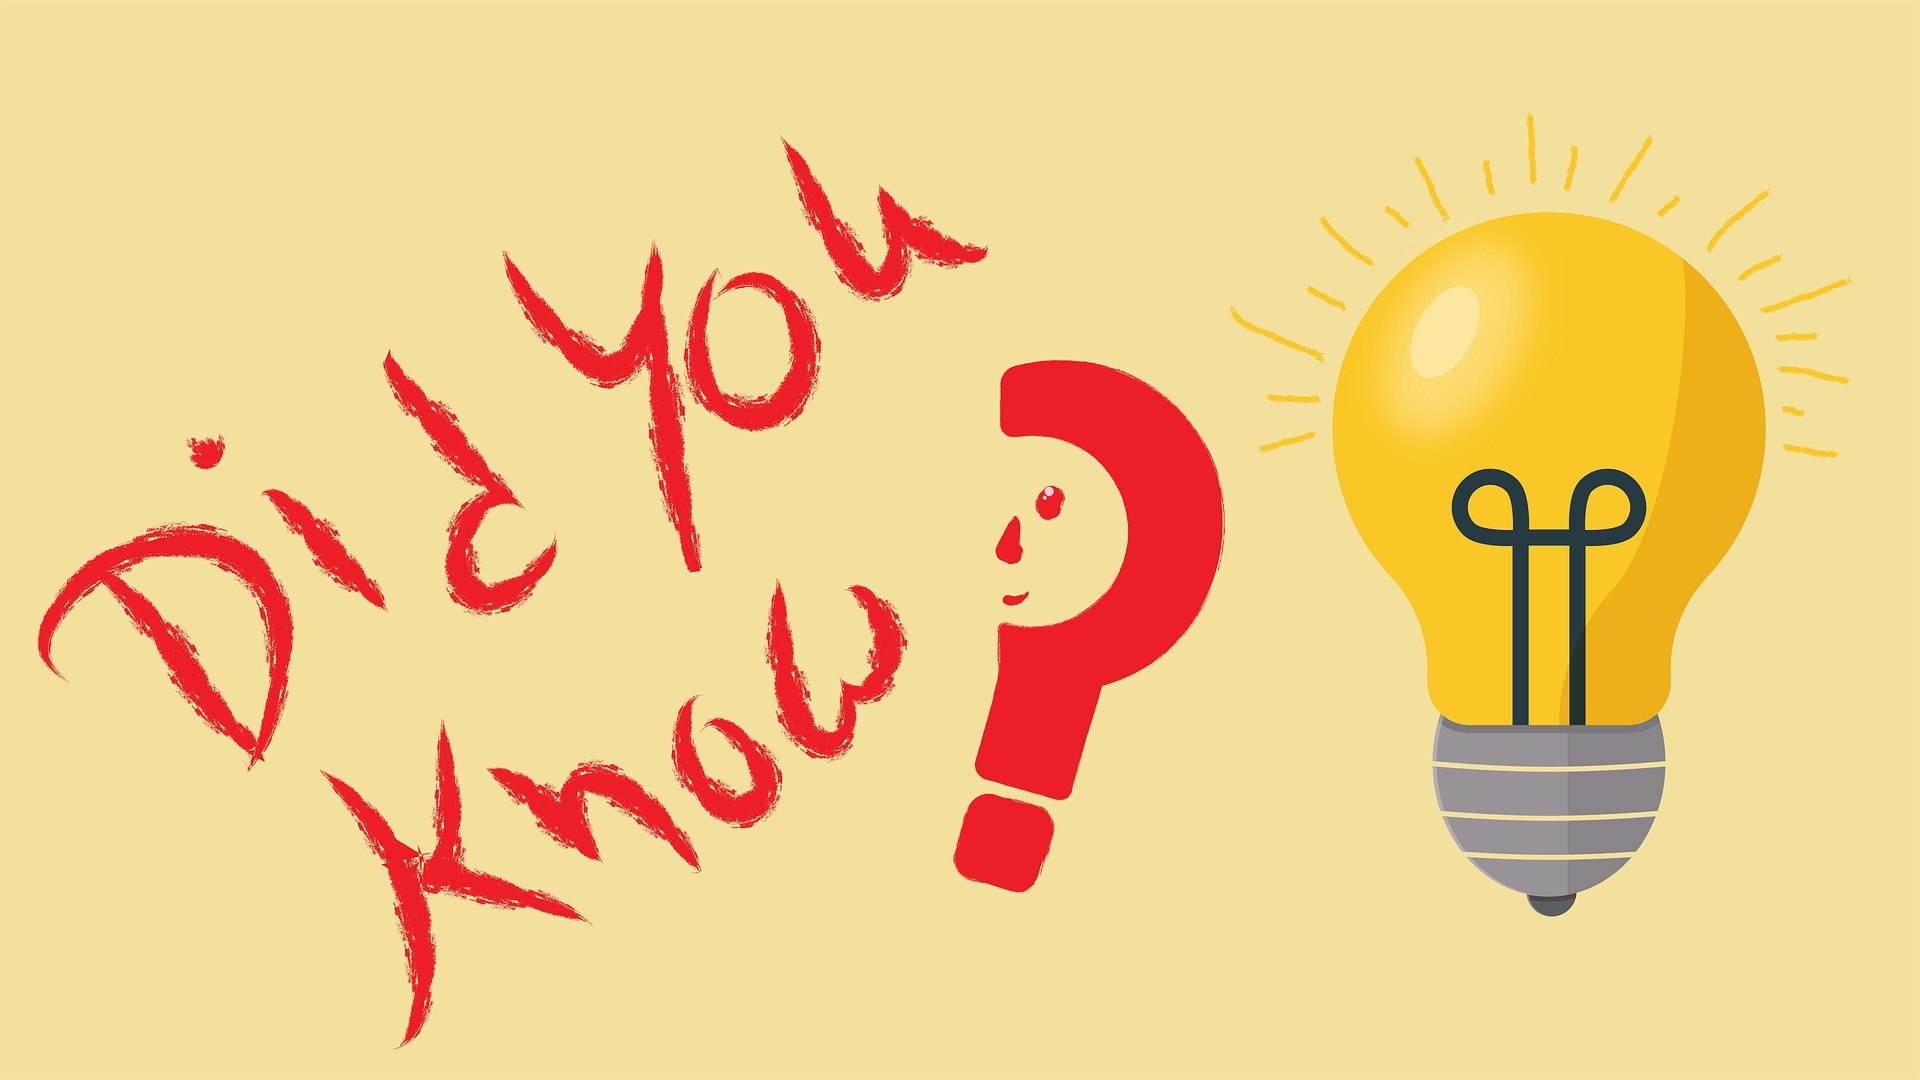 Yellow graphic with the words "did you know?" and a light bulb to illustrate, "